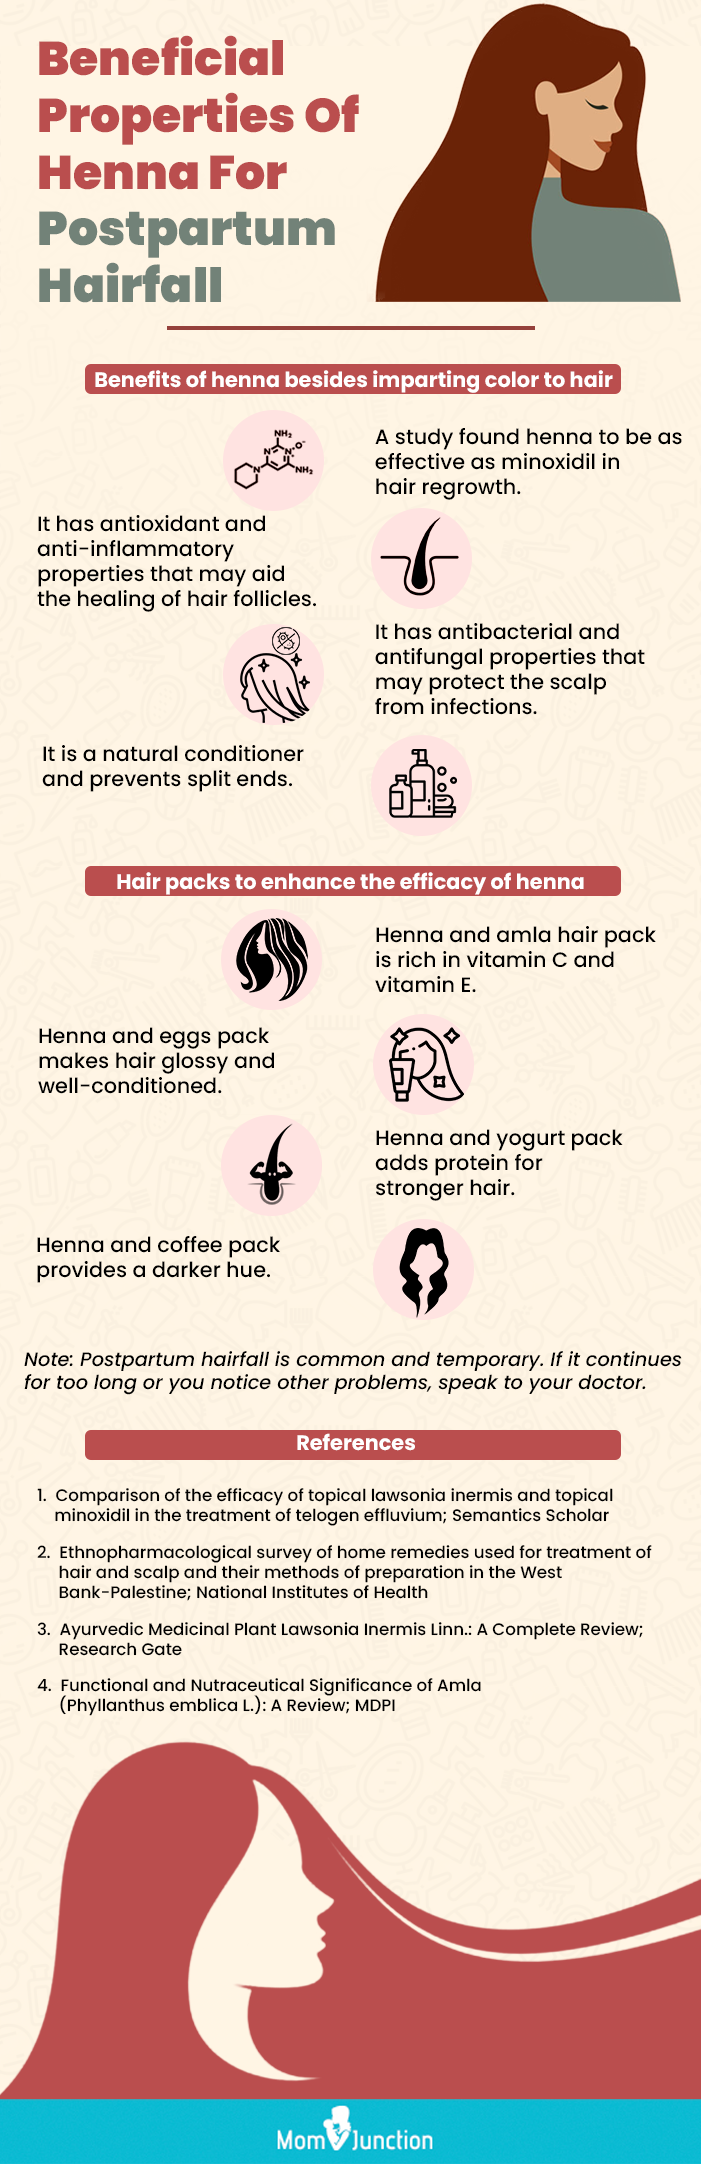 benefits of using henna for coloring hair during breastfeeding (infographic)